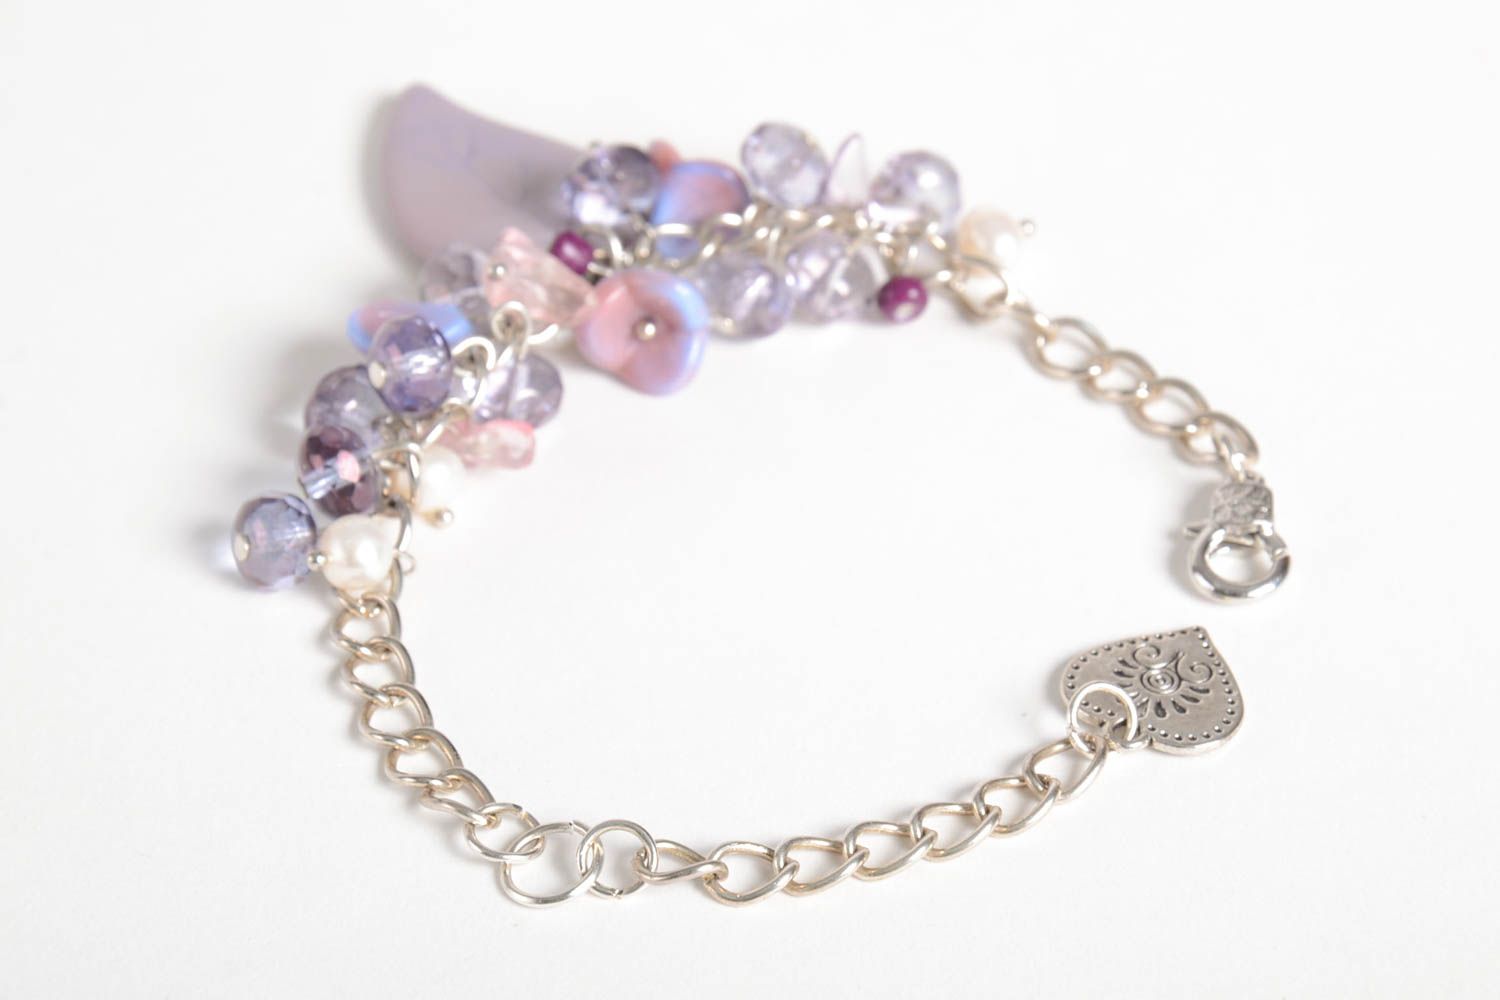 Chain handmade charm bracelet with purple and transparent beads with leaves charms photo 4